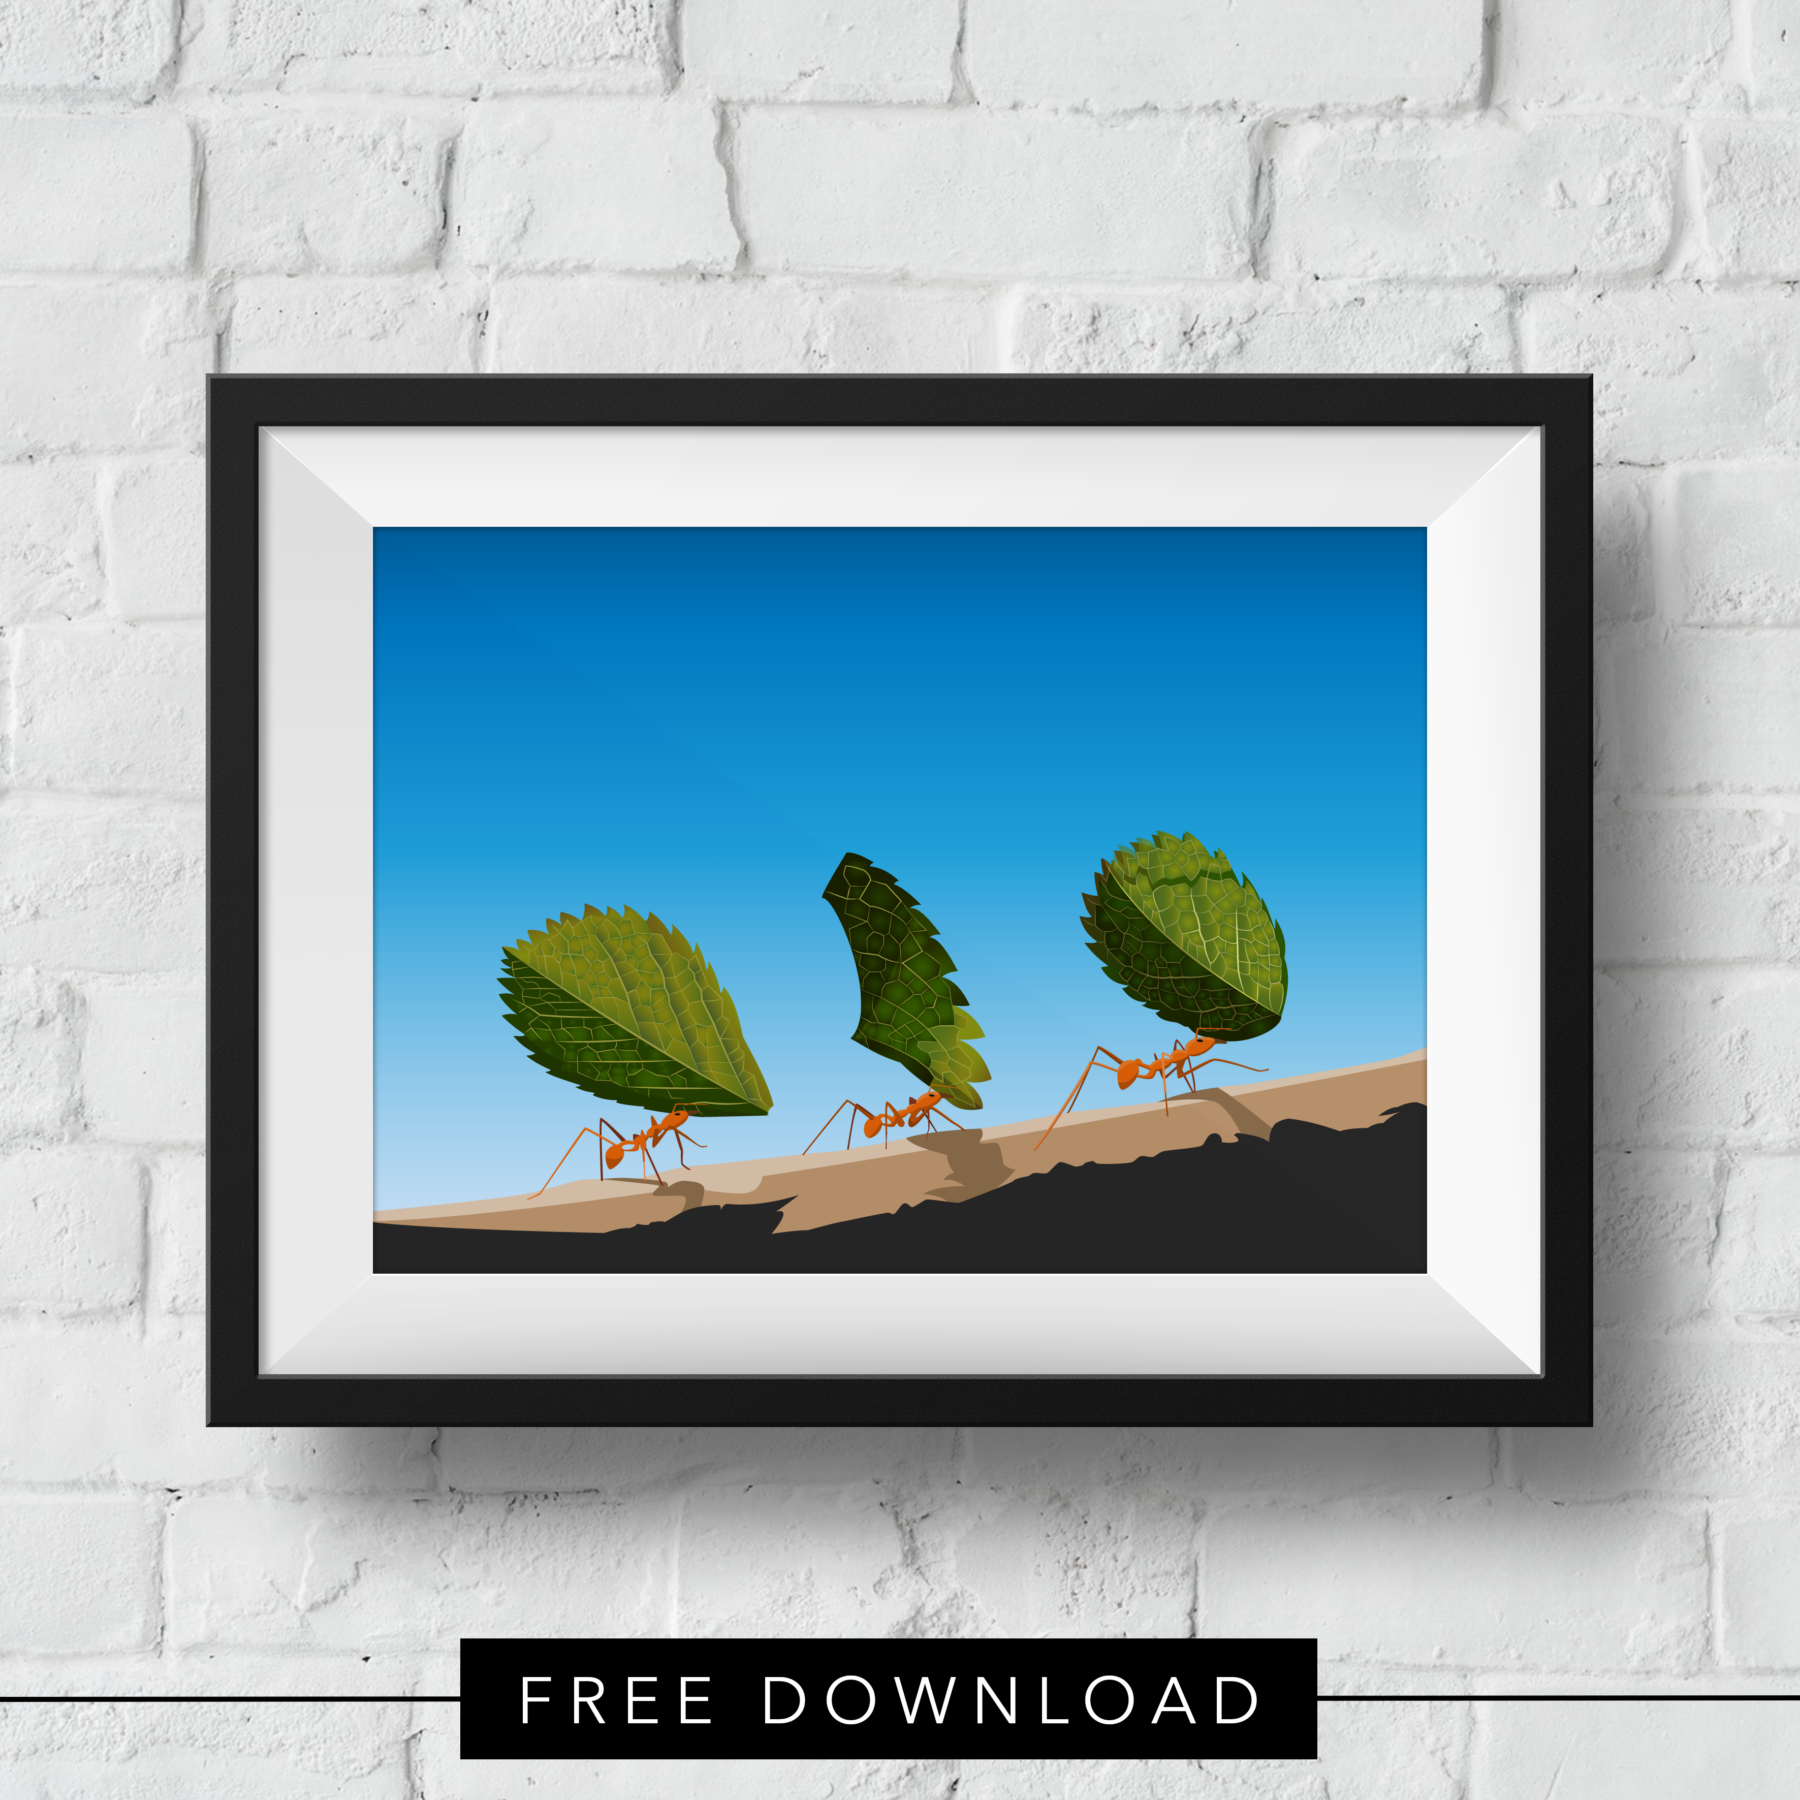 ants-free-download